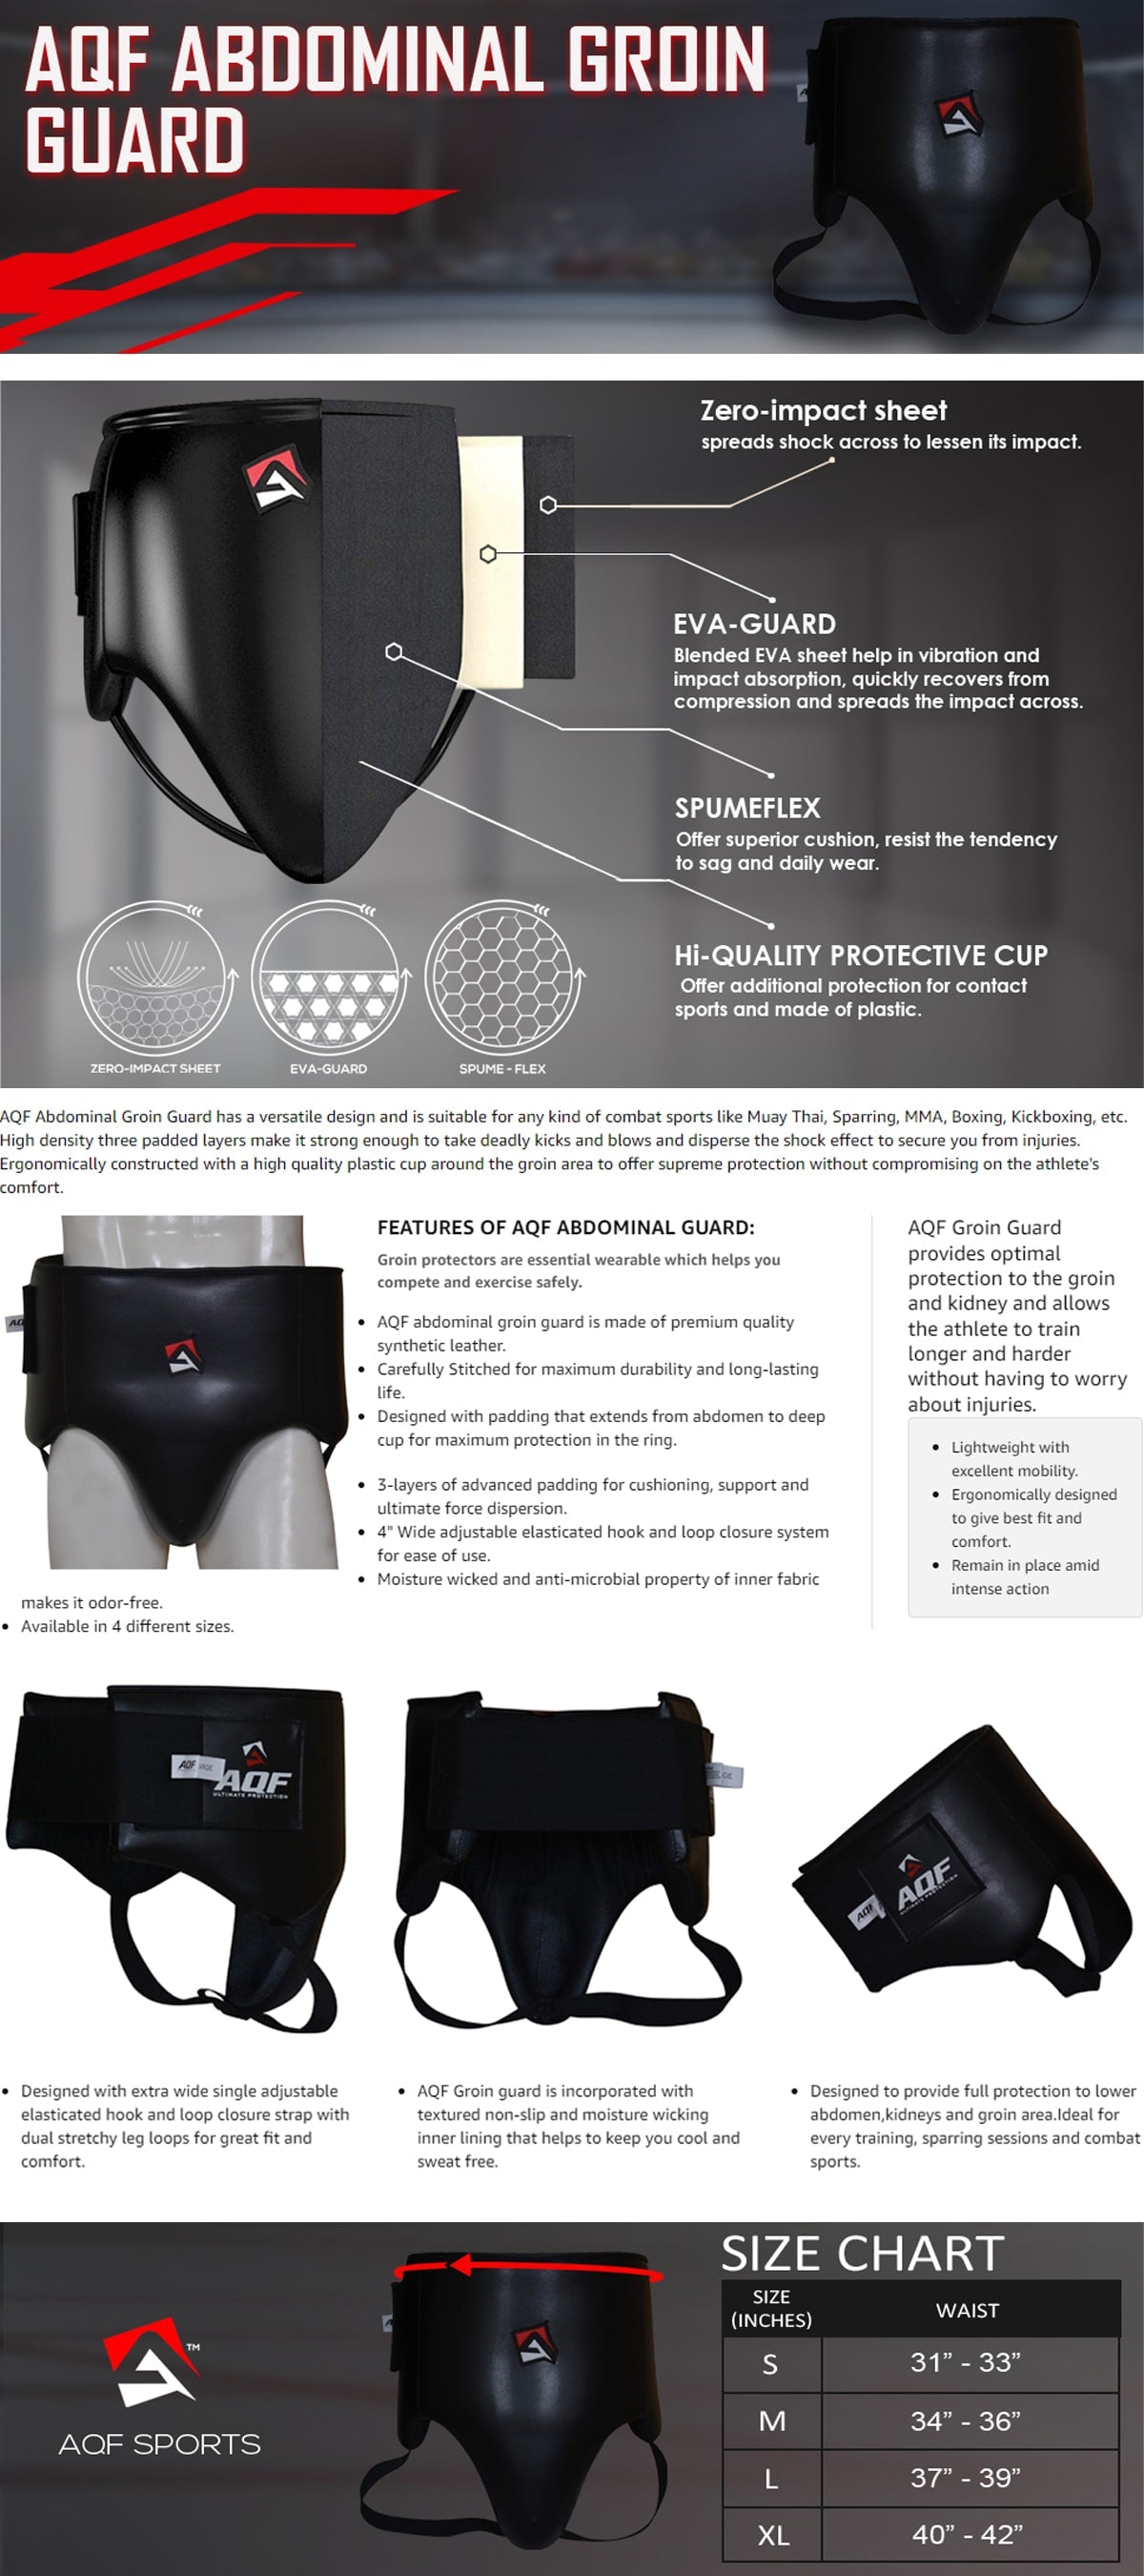 Features of AQF Abdominal Guard